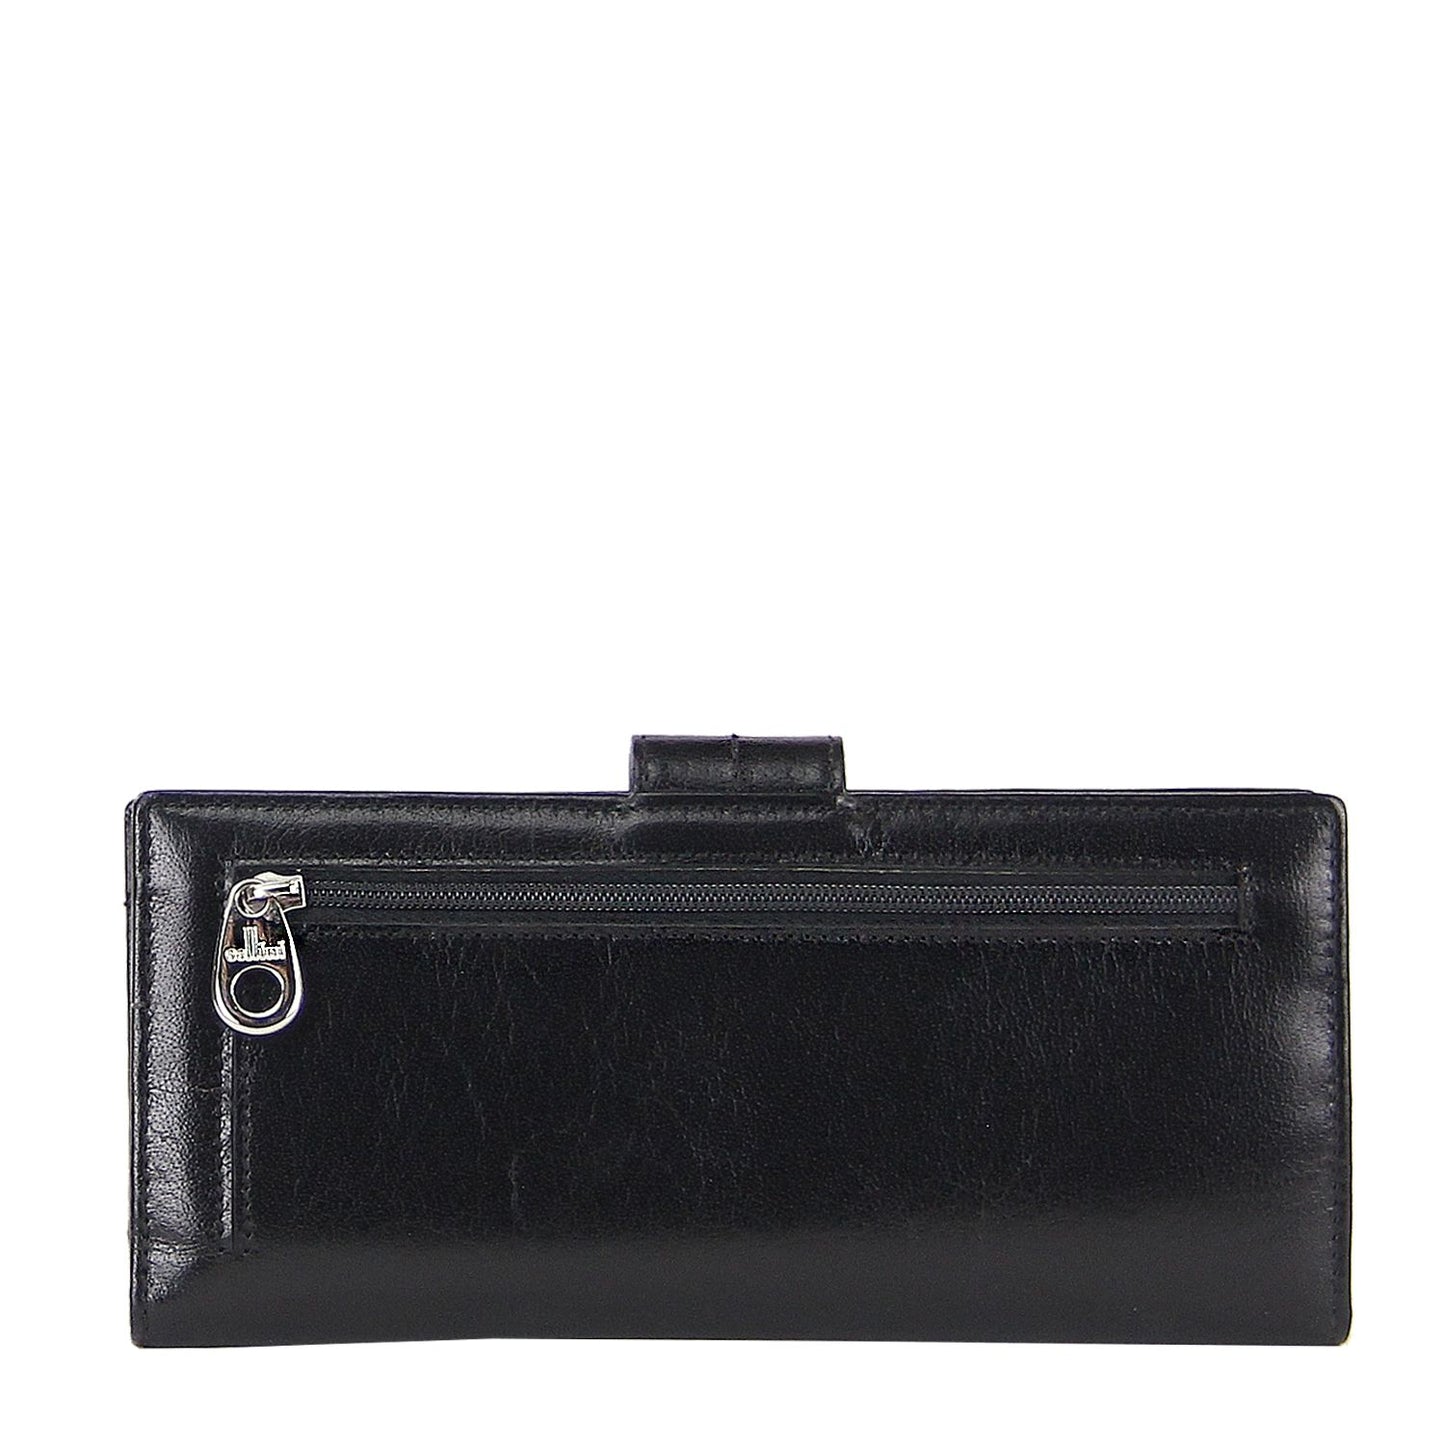 Cellini - Petra Trifold Wallet